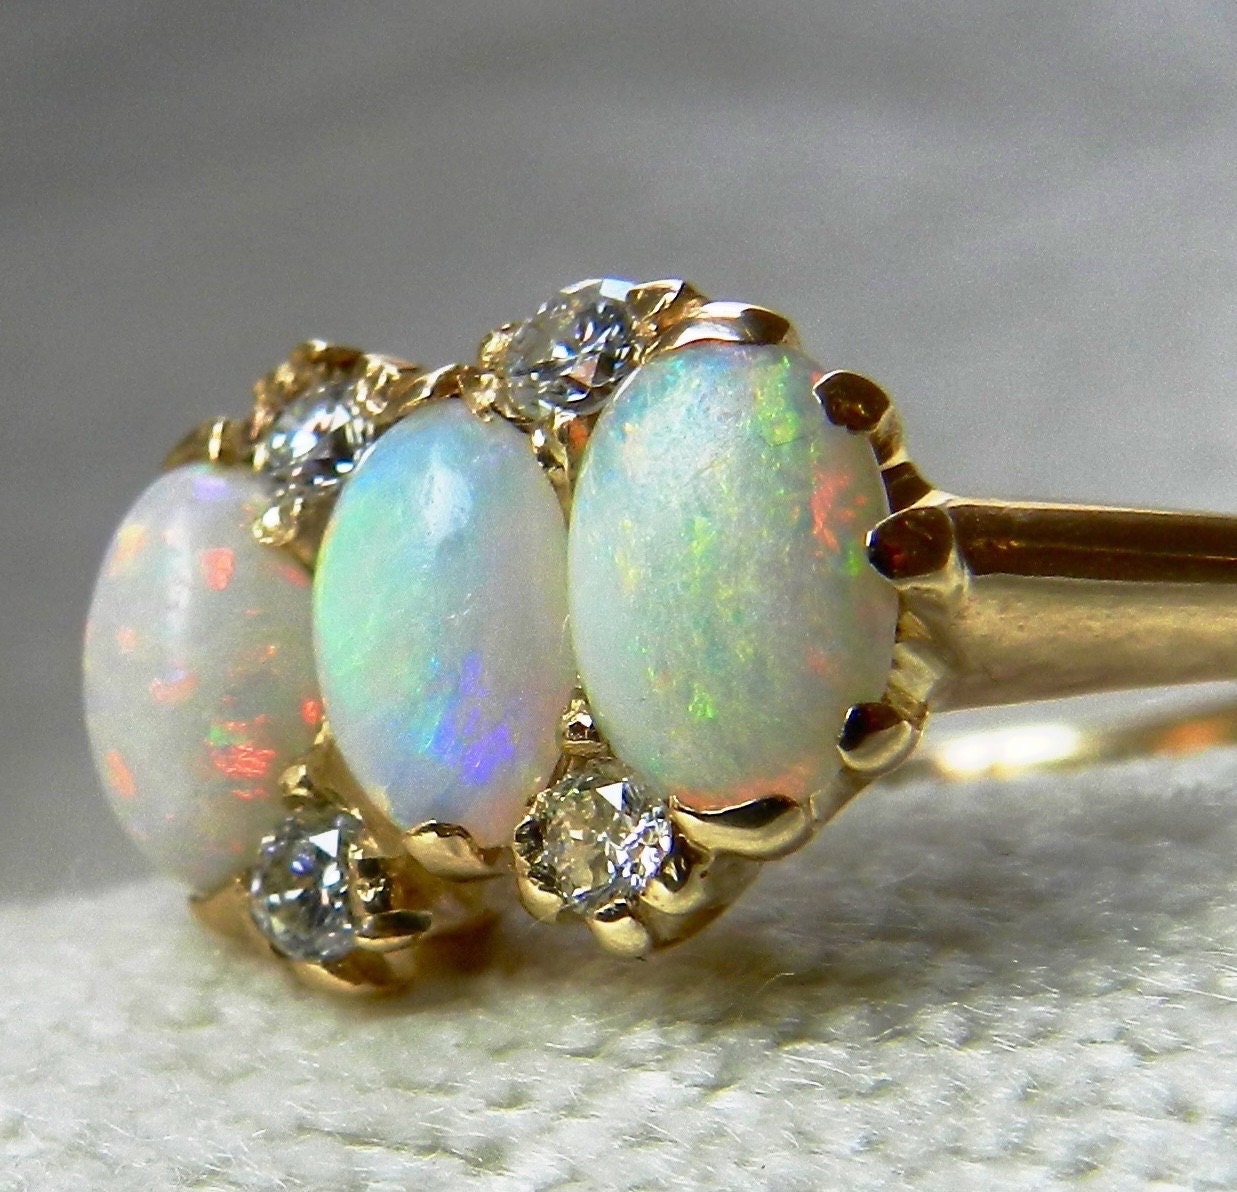 Vintage Opal Engagement Ring - www.inf-inet.com